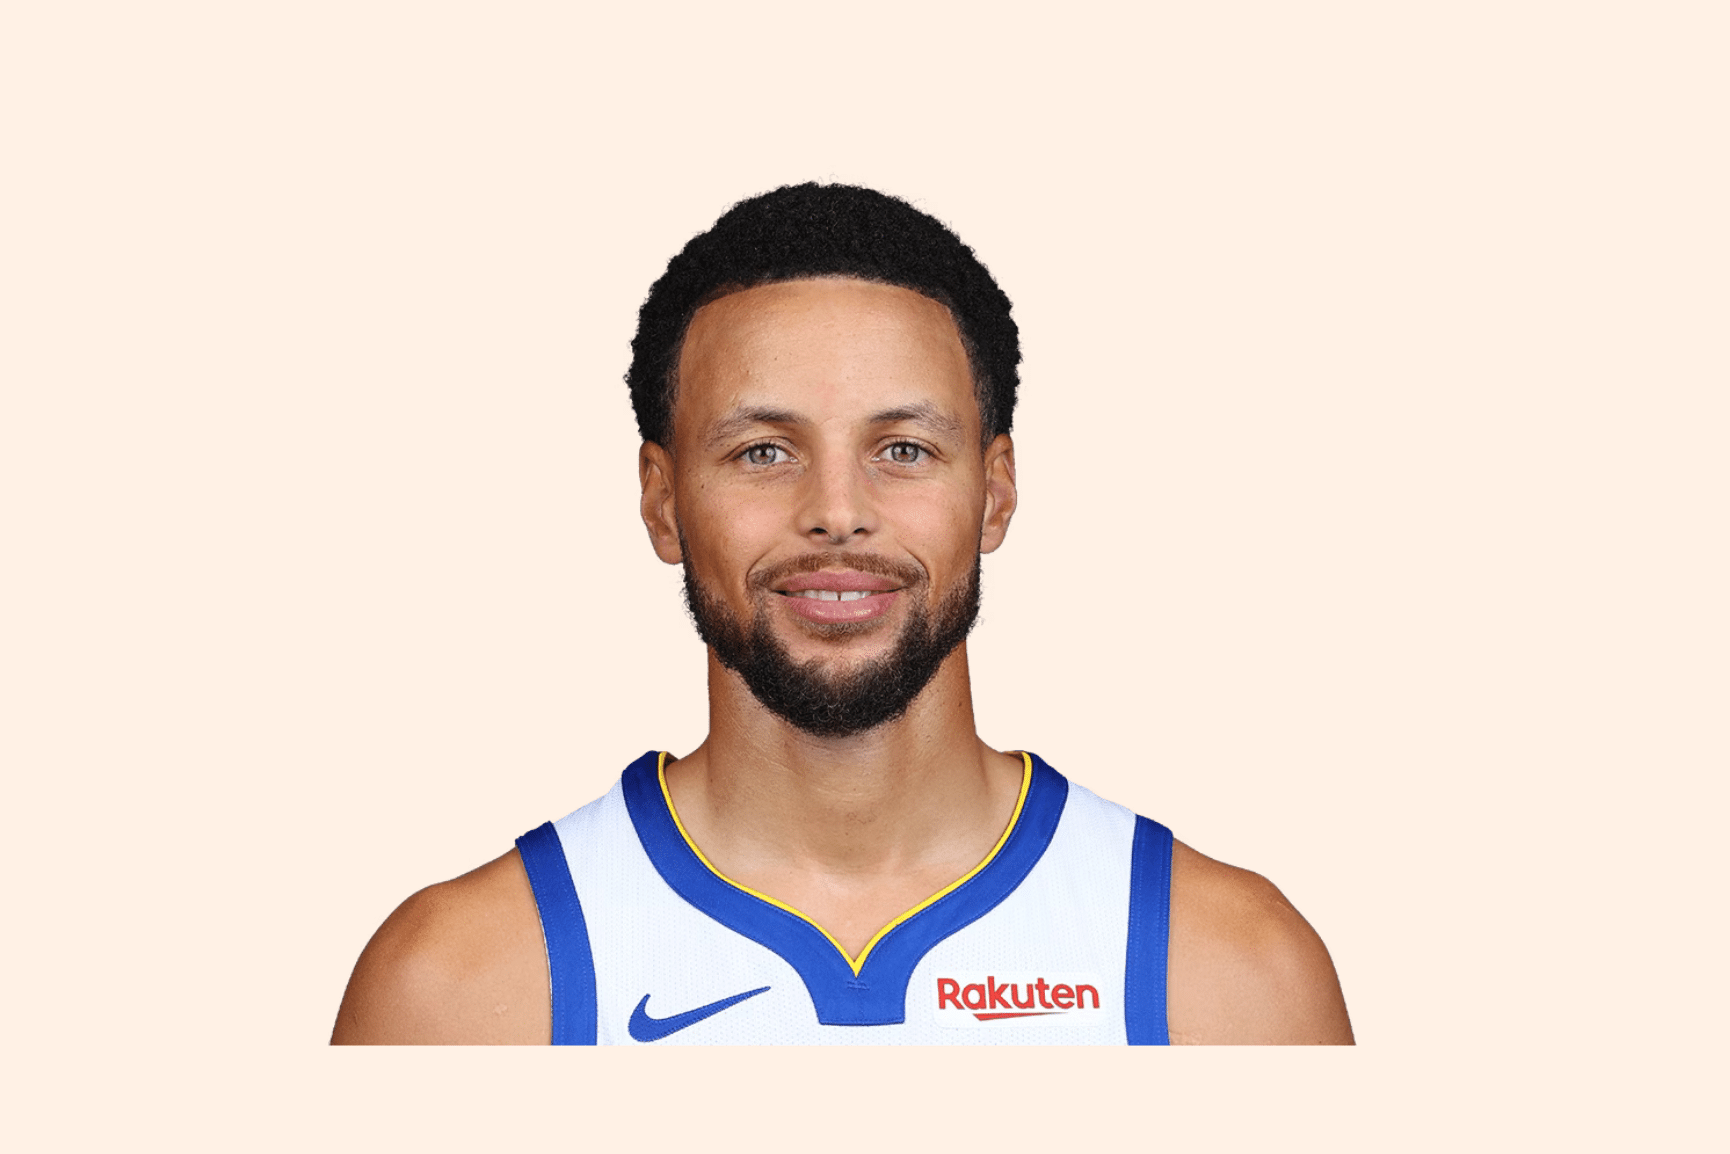 Stephen Curry Stats: Height, Weight, Position, Net Worth